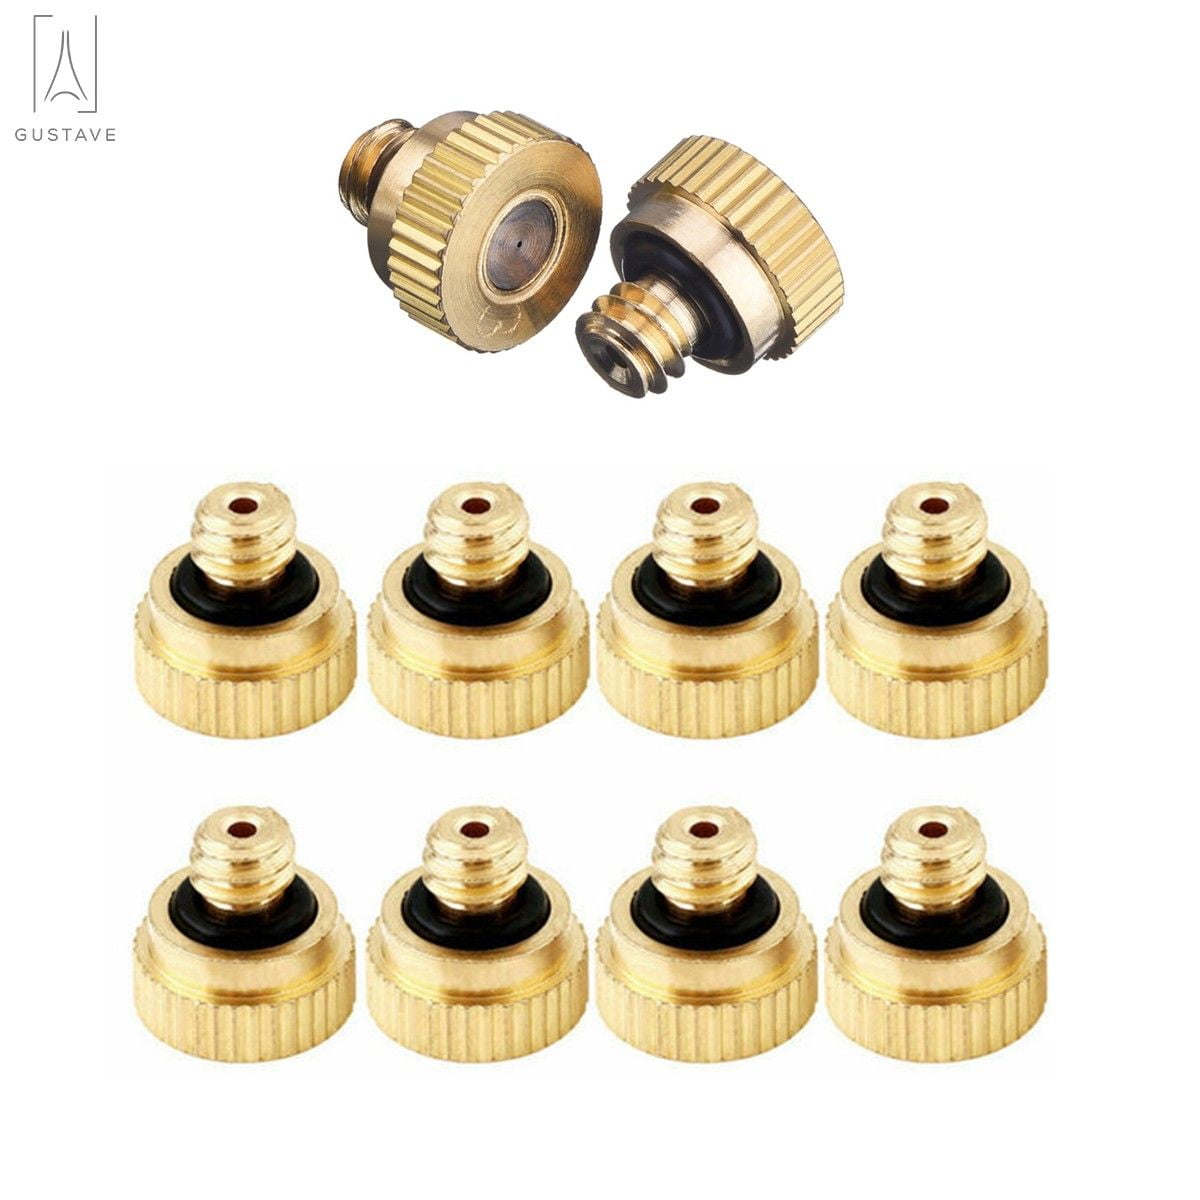 Details about   Brass Misting Nozzles Water Mister Sprinkle For Cooling System 0.012" 10/24 UN 